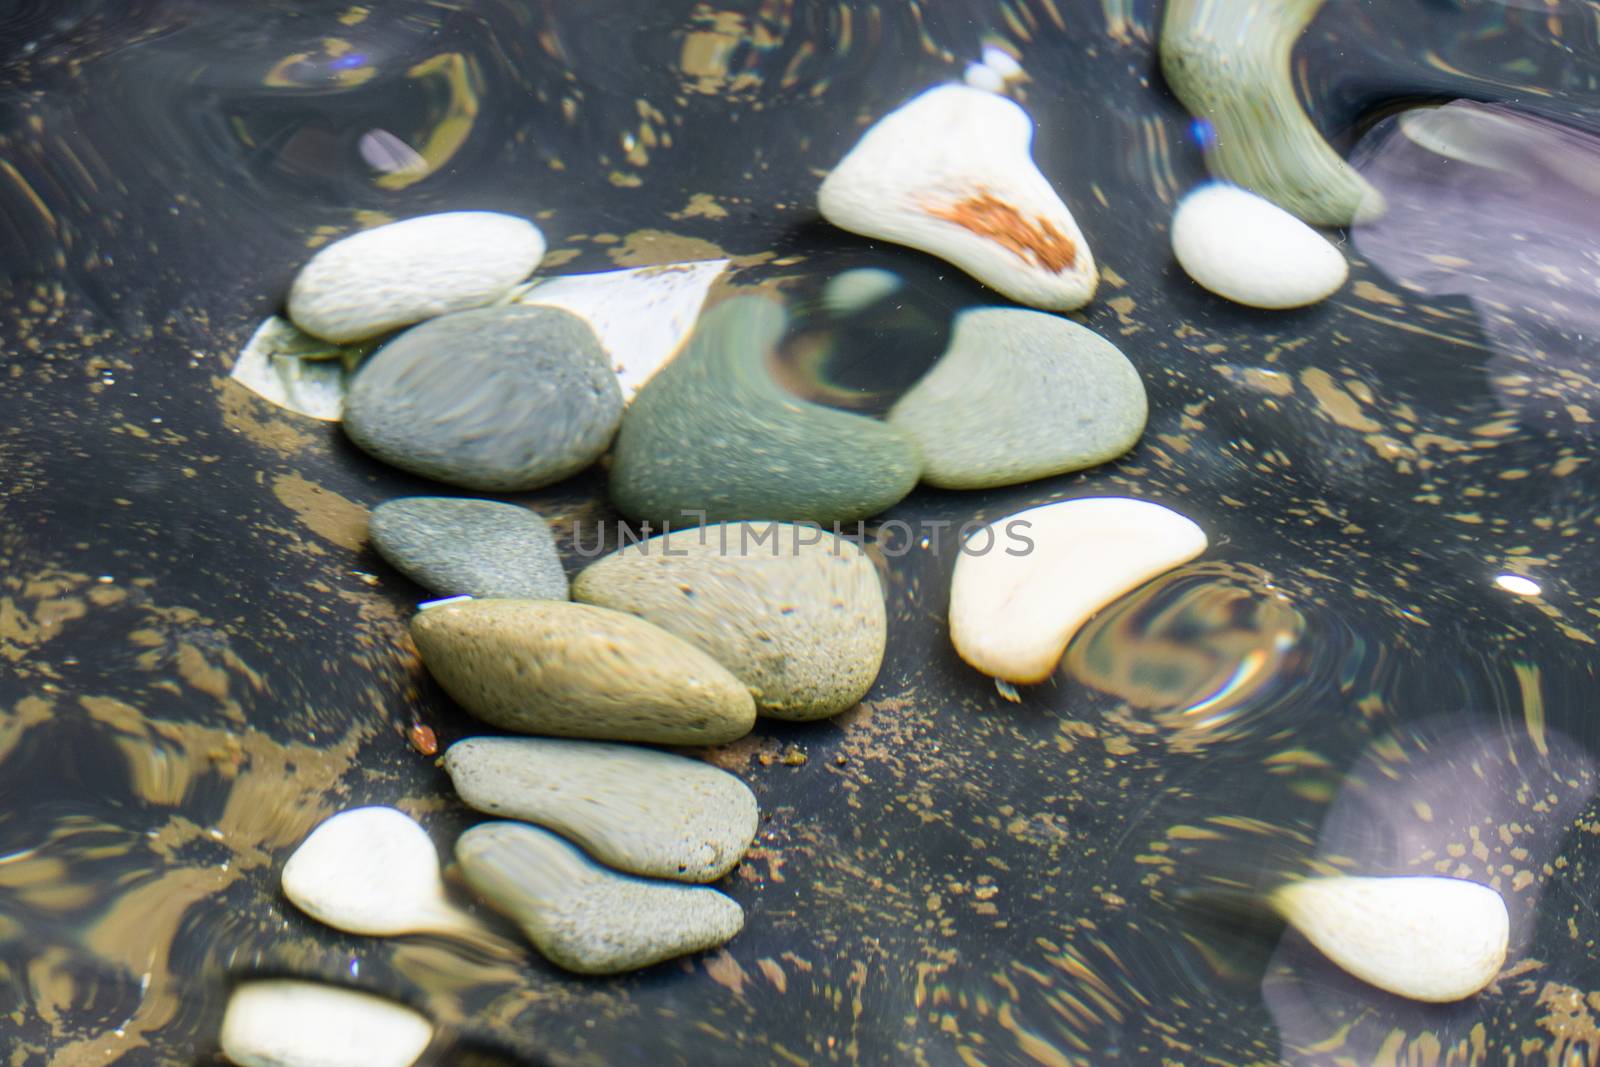 looking at the pebble stones in the water through wobbling surface